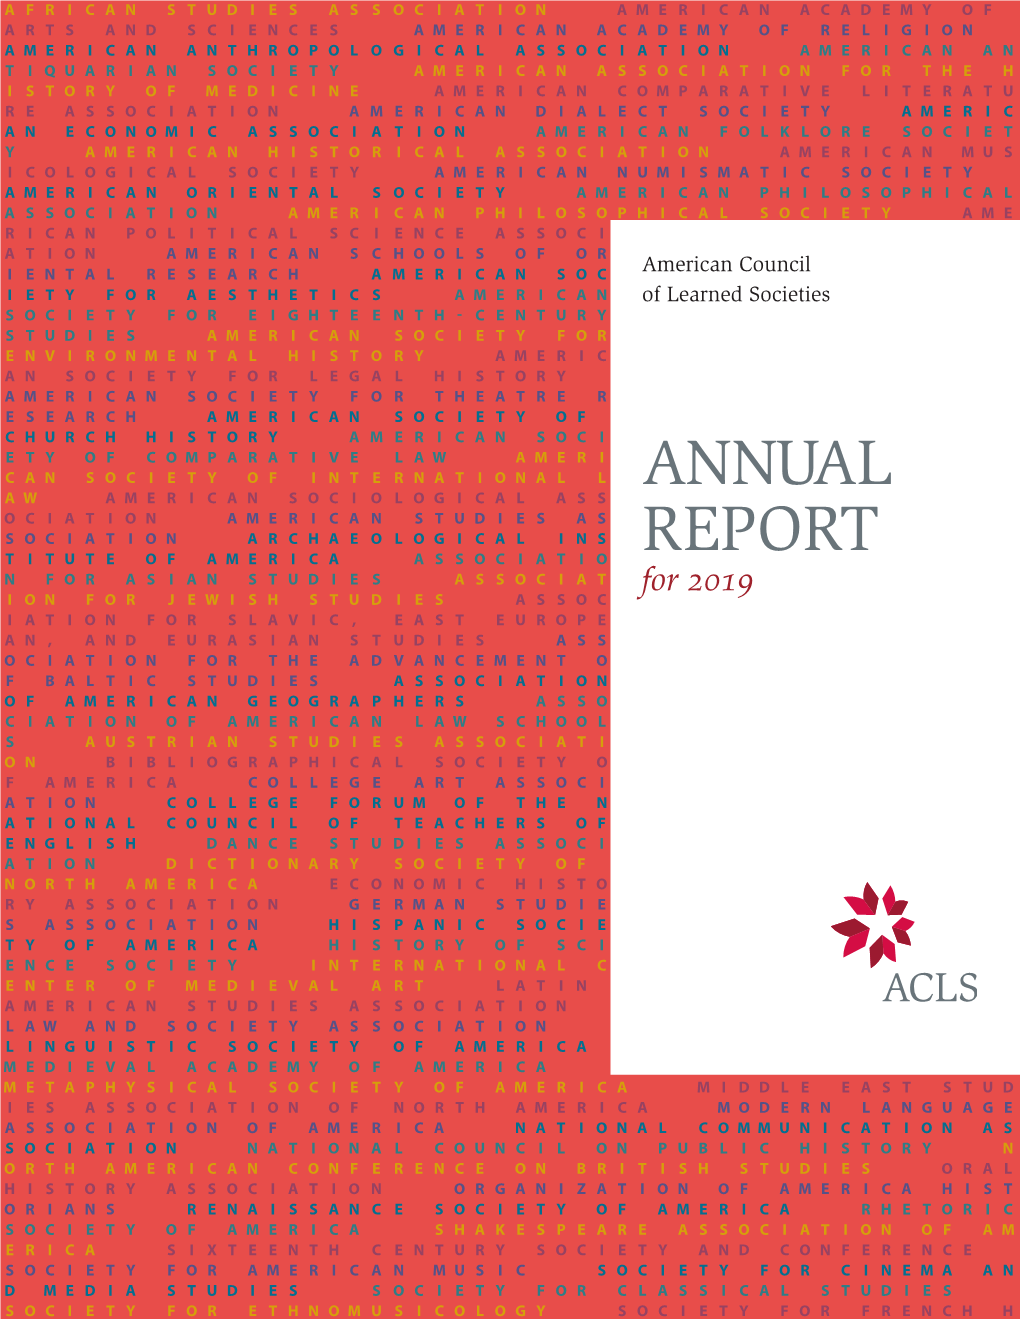 ACLS Annual Report for 2019